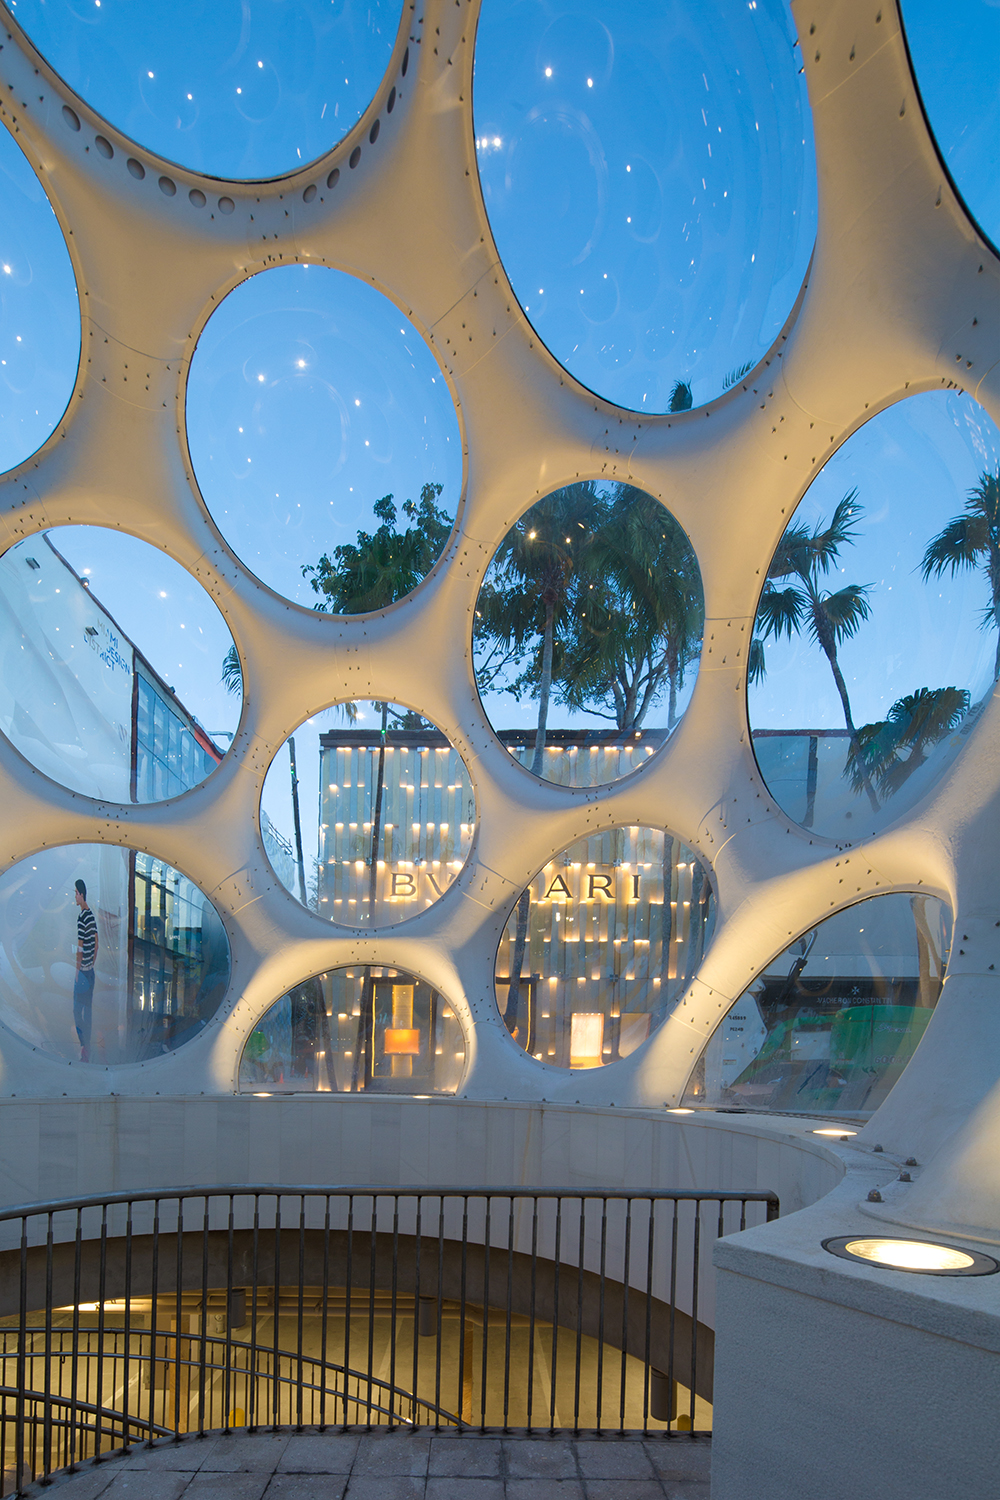 Redesign of Buckminster fuller’s fly’s eye dome recreated in miami design district: